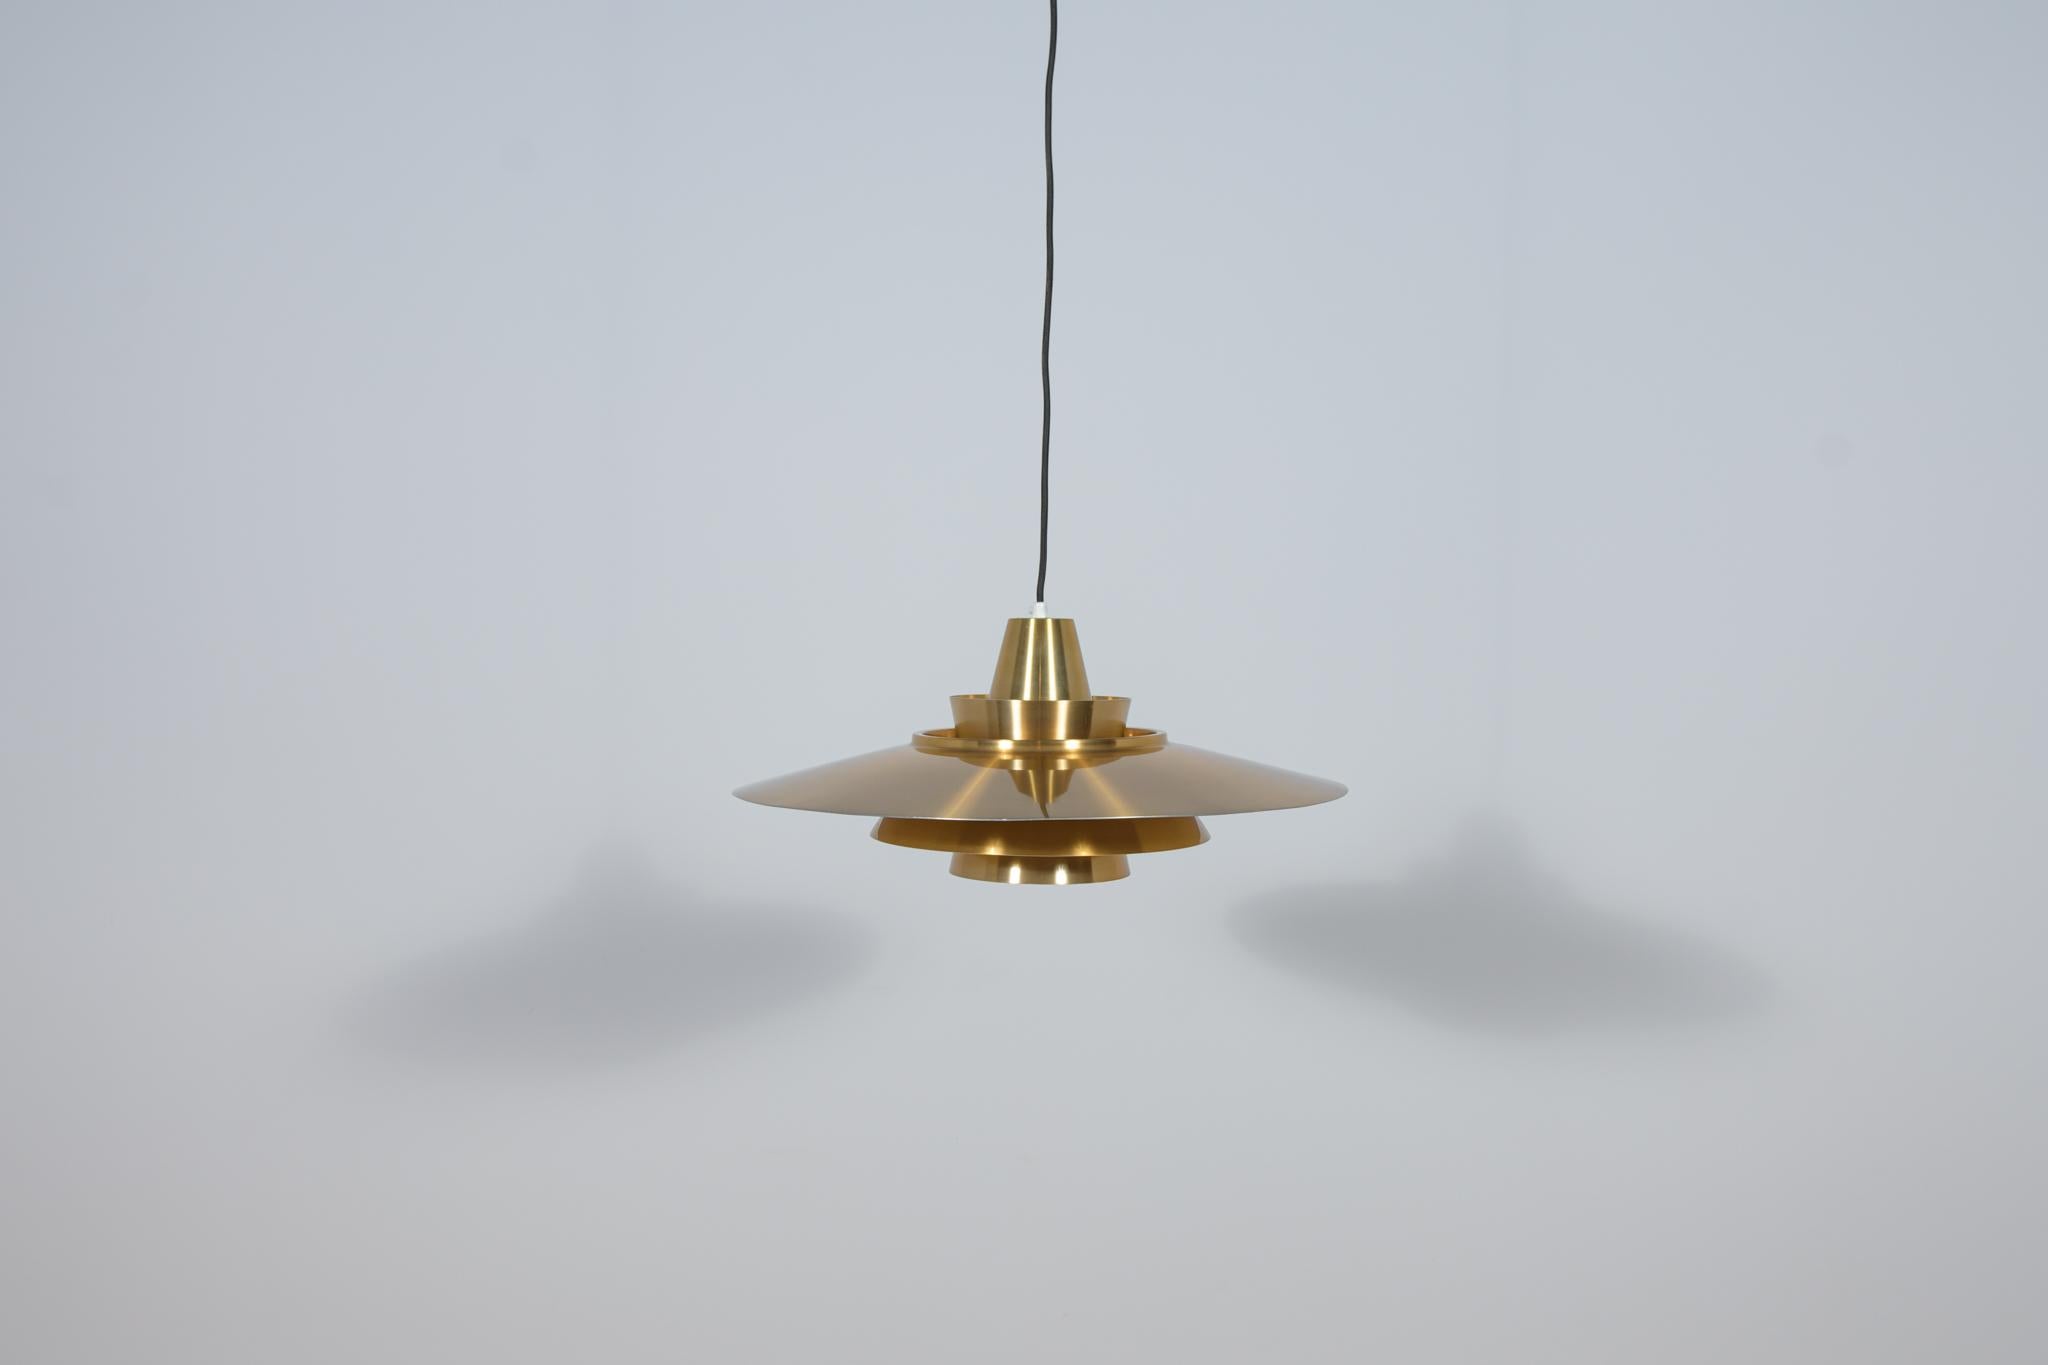 Pendant lamp made in Denmark in the 1970s. It is made of brushed aluminum in gold. The lamp is in very good condition with slight traces of use. The wiring has been replaced. The lamp has been checked by an electrician and is fully functional.